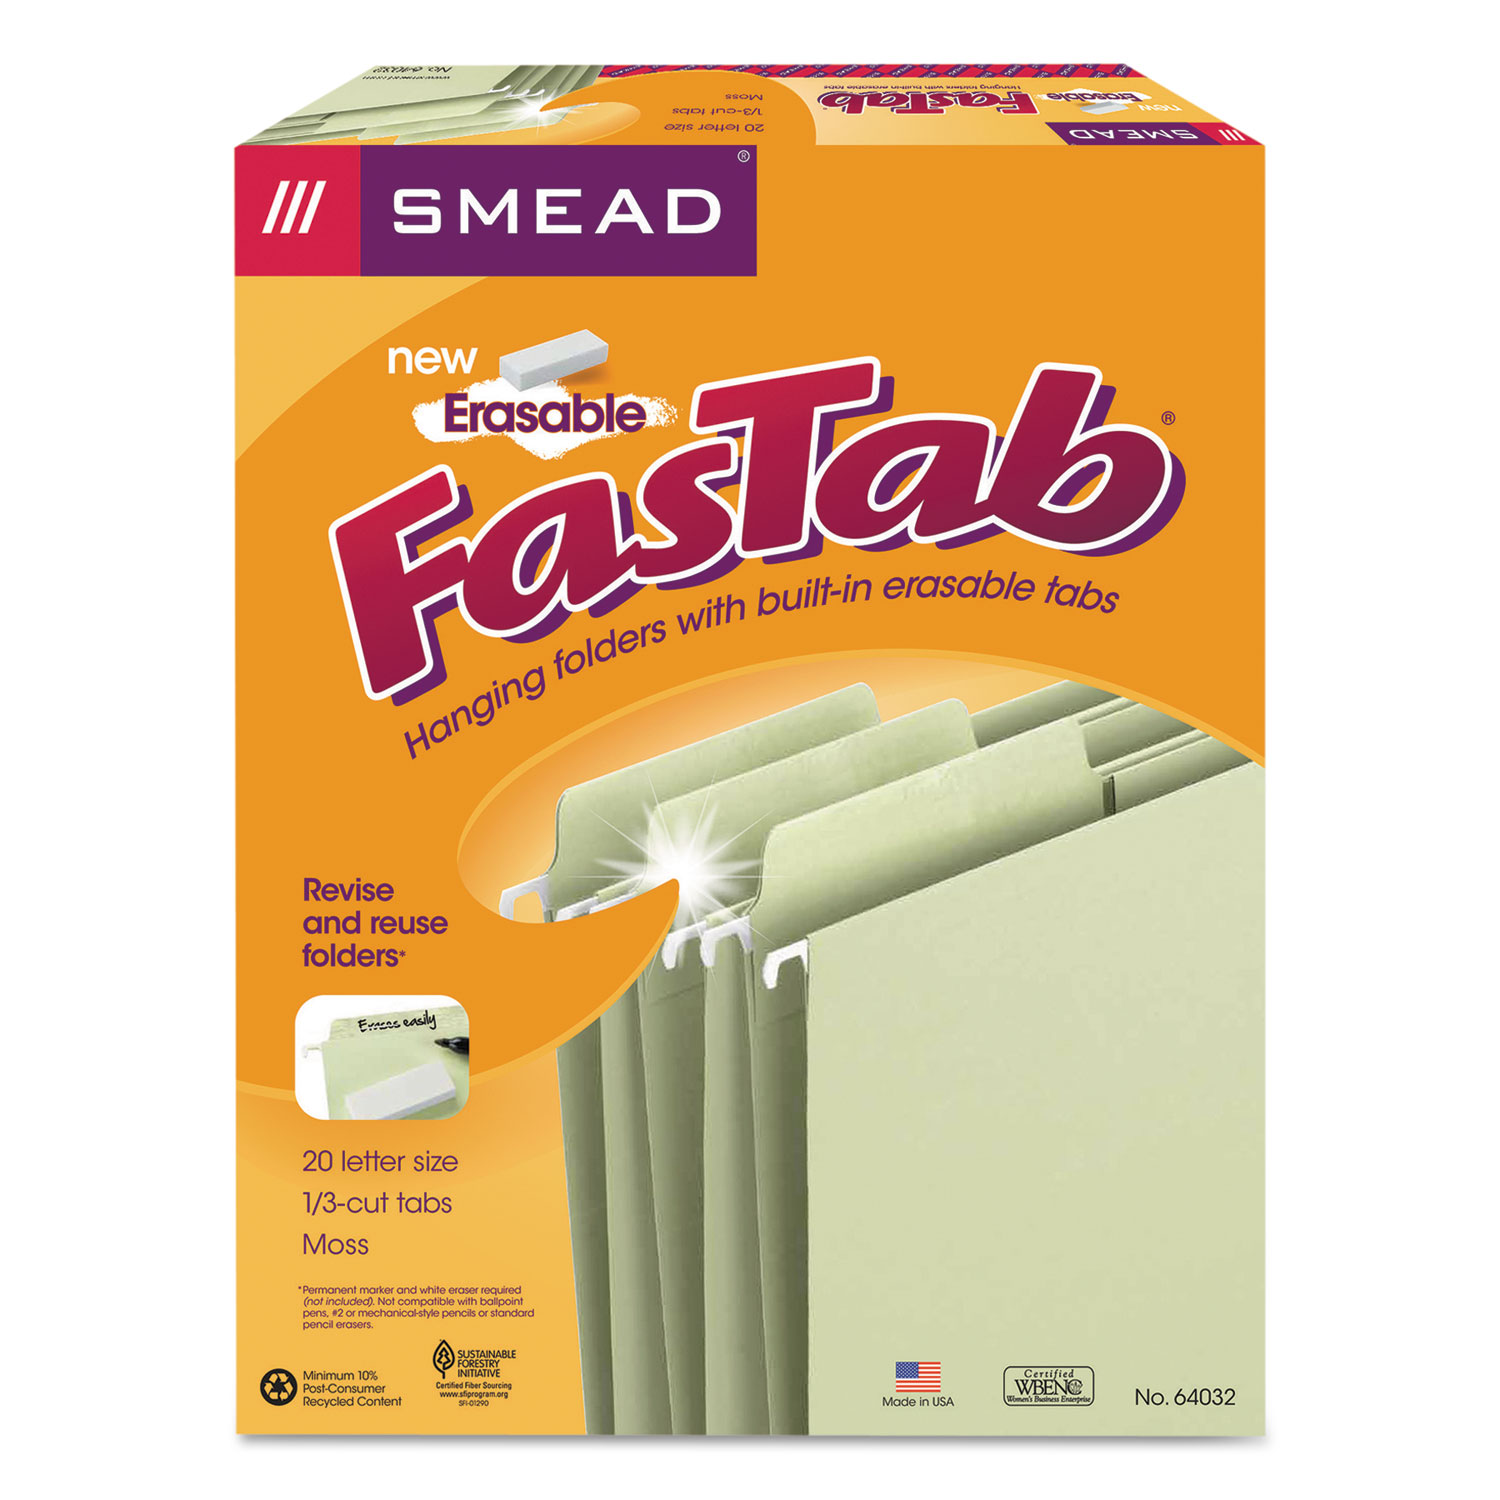  Smead 64032 Erasable FasTab Hanging Folders, Letter Size, 1/3-Cut Tab, Moss, 20/Box (SMD64032) 